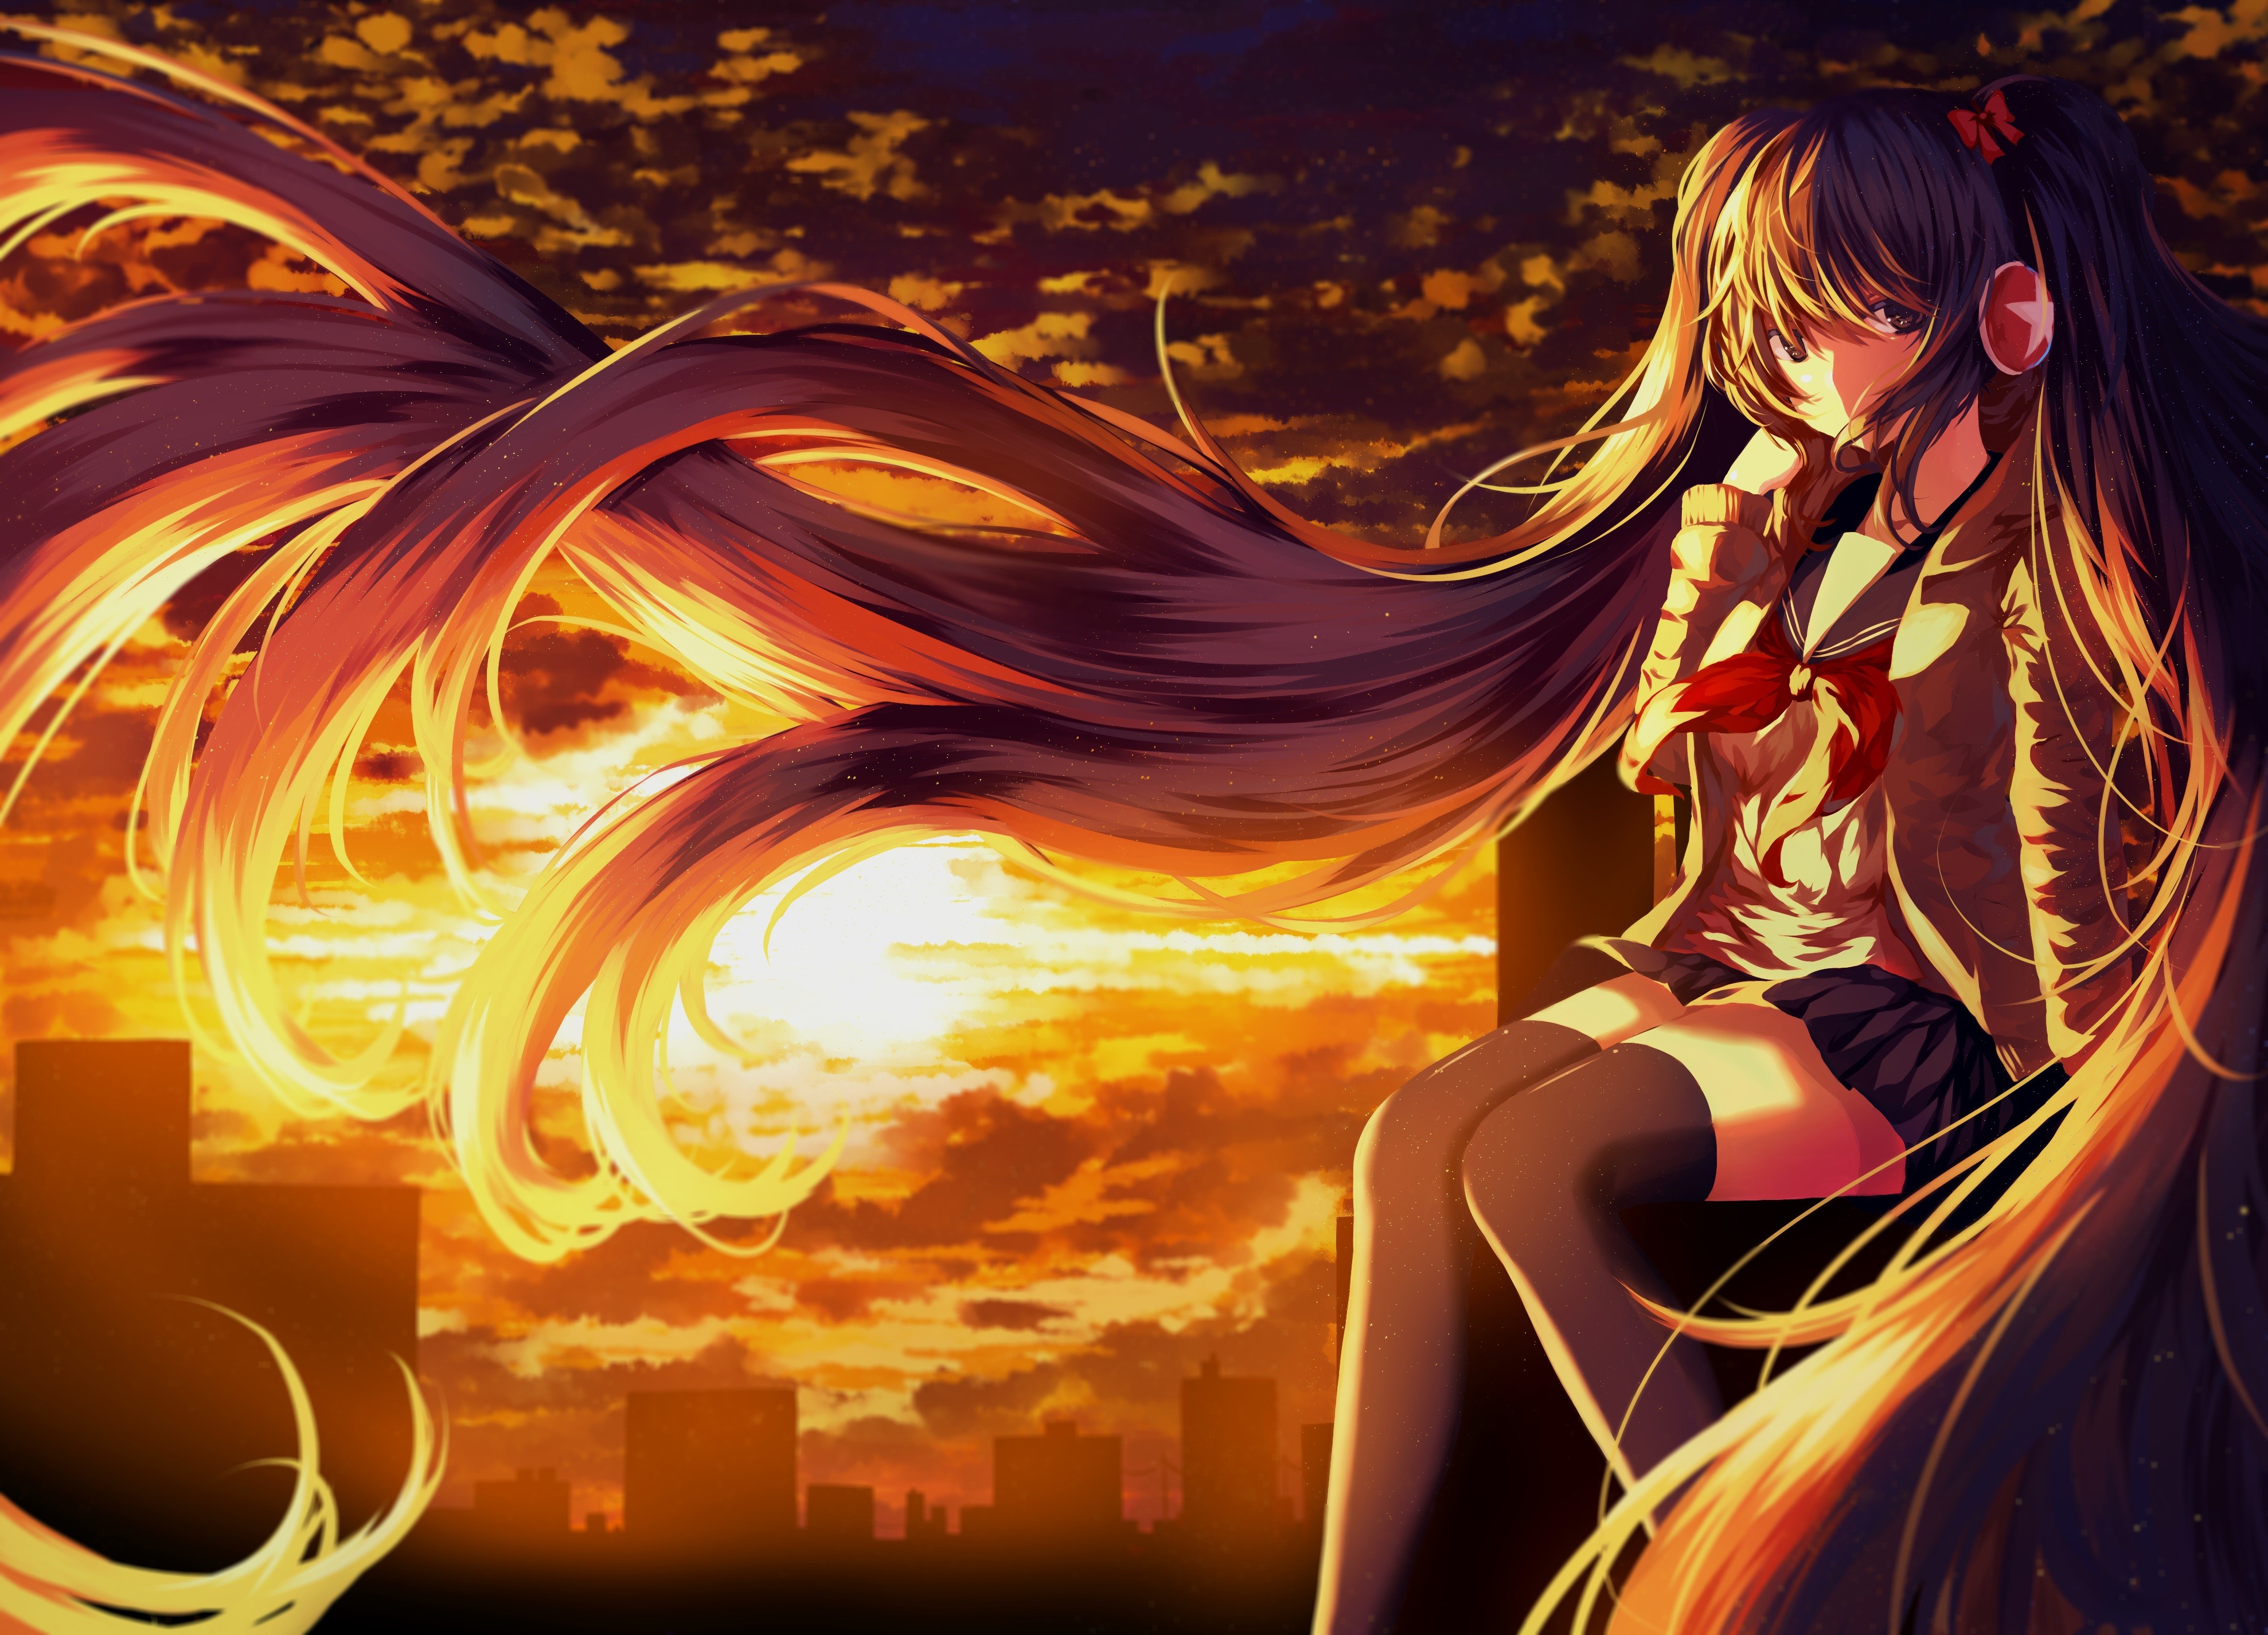 Anime 3955x2852 anime anime girls Hatsune Miku Vocaloid sunset twintails thigh-highs long hair stockings sunlight black stockings hair in face Pixiv